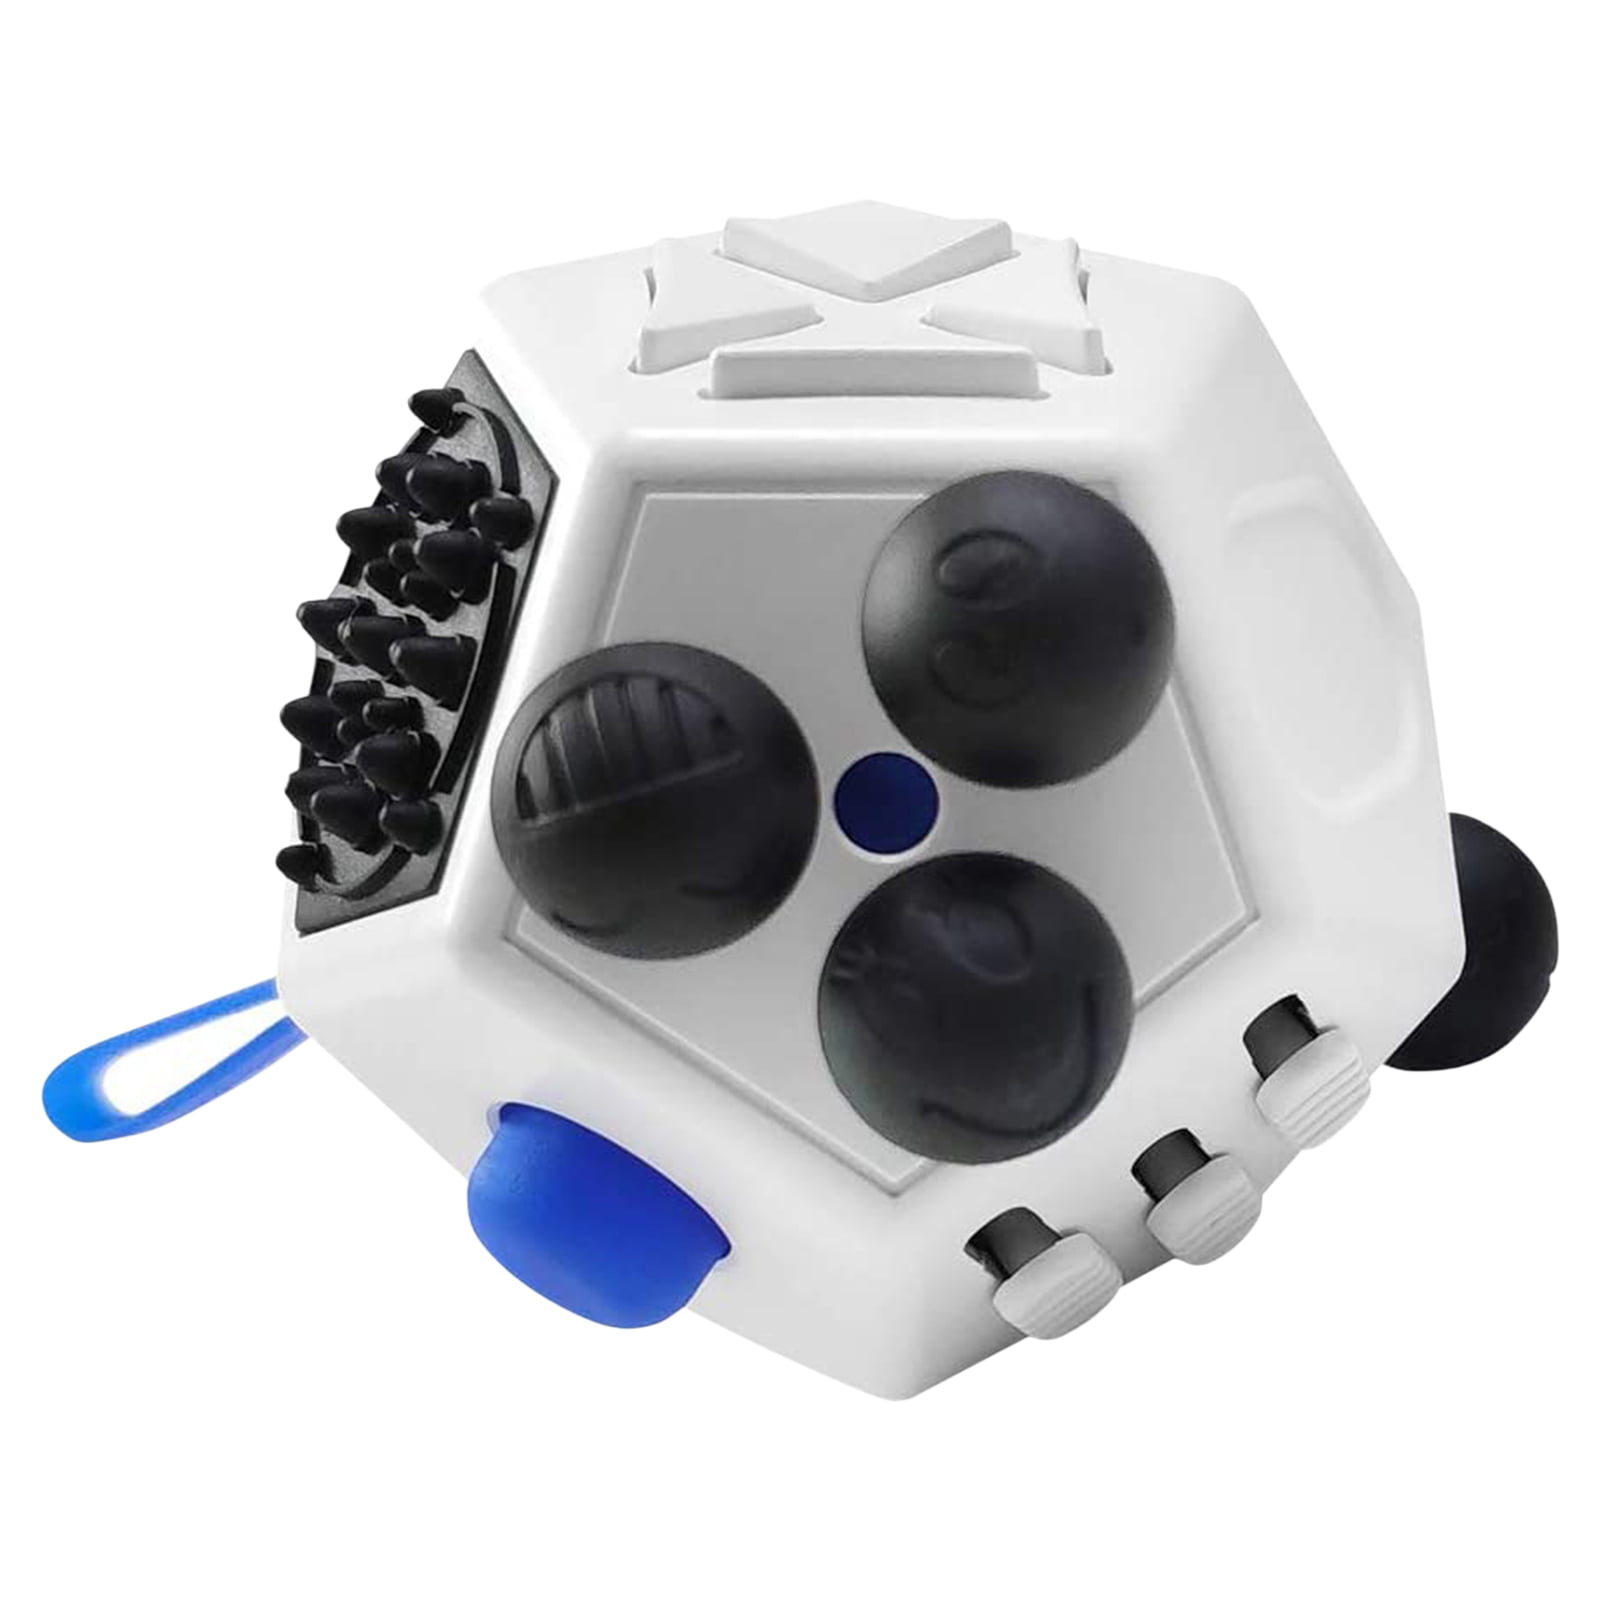 Details about   Relief Cube Anti Stress Decompression Dice Toys 